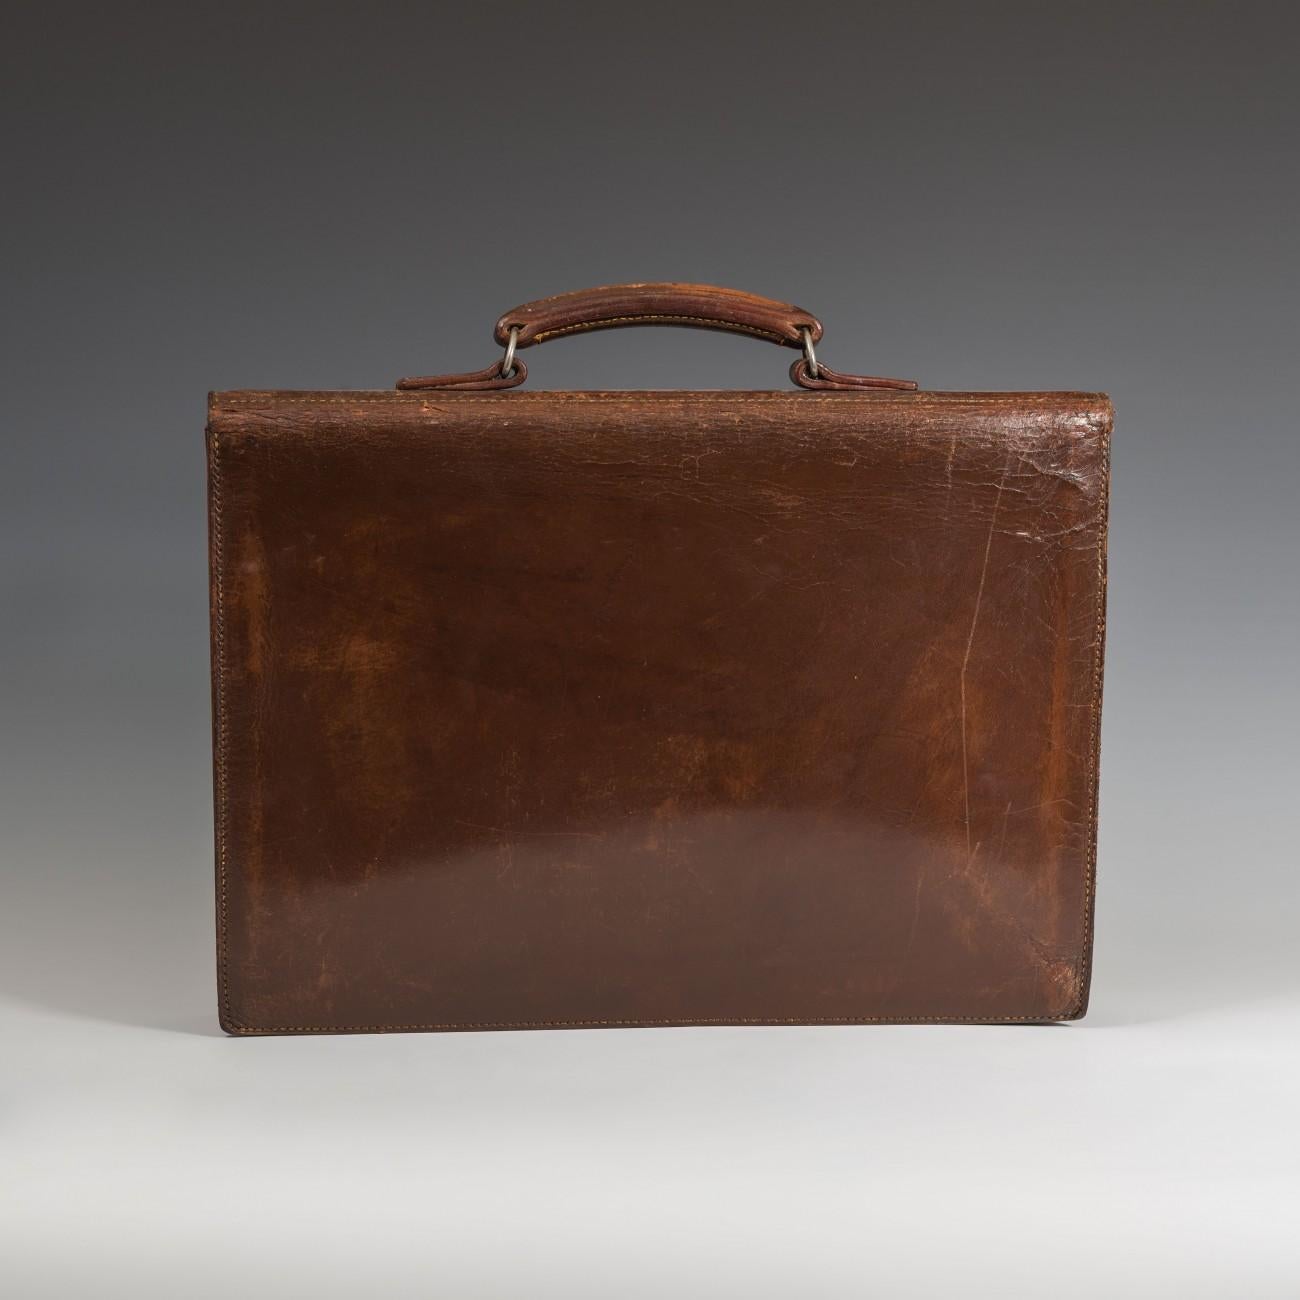 A handsome English made leather three pocket briefcase with two buckled straps and central chrome-plated adjustable catch, circa 1950.

Dimensions: 40.5 cm/16 inches (length) x 29 cm/11? inches (height) x 5.5 cm/2? inches (thick)

Bentleys are